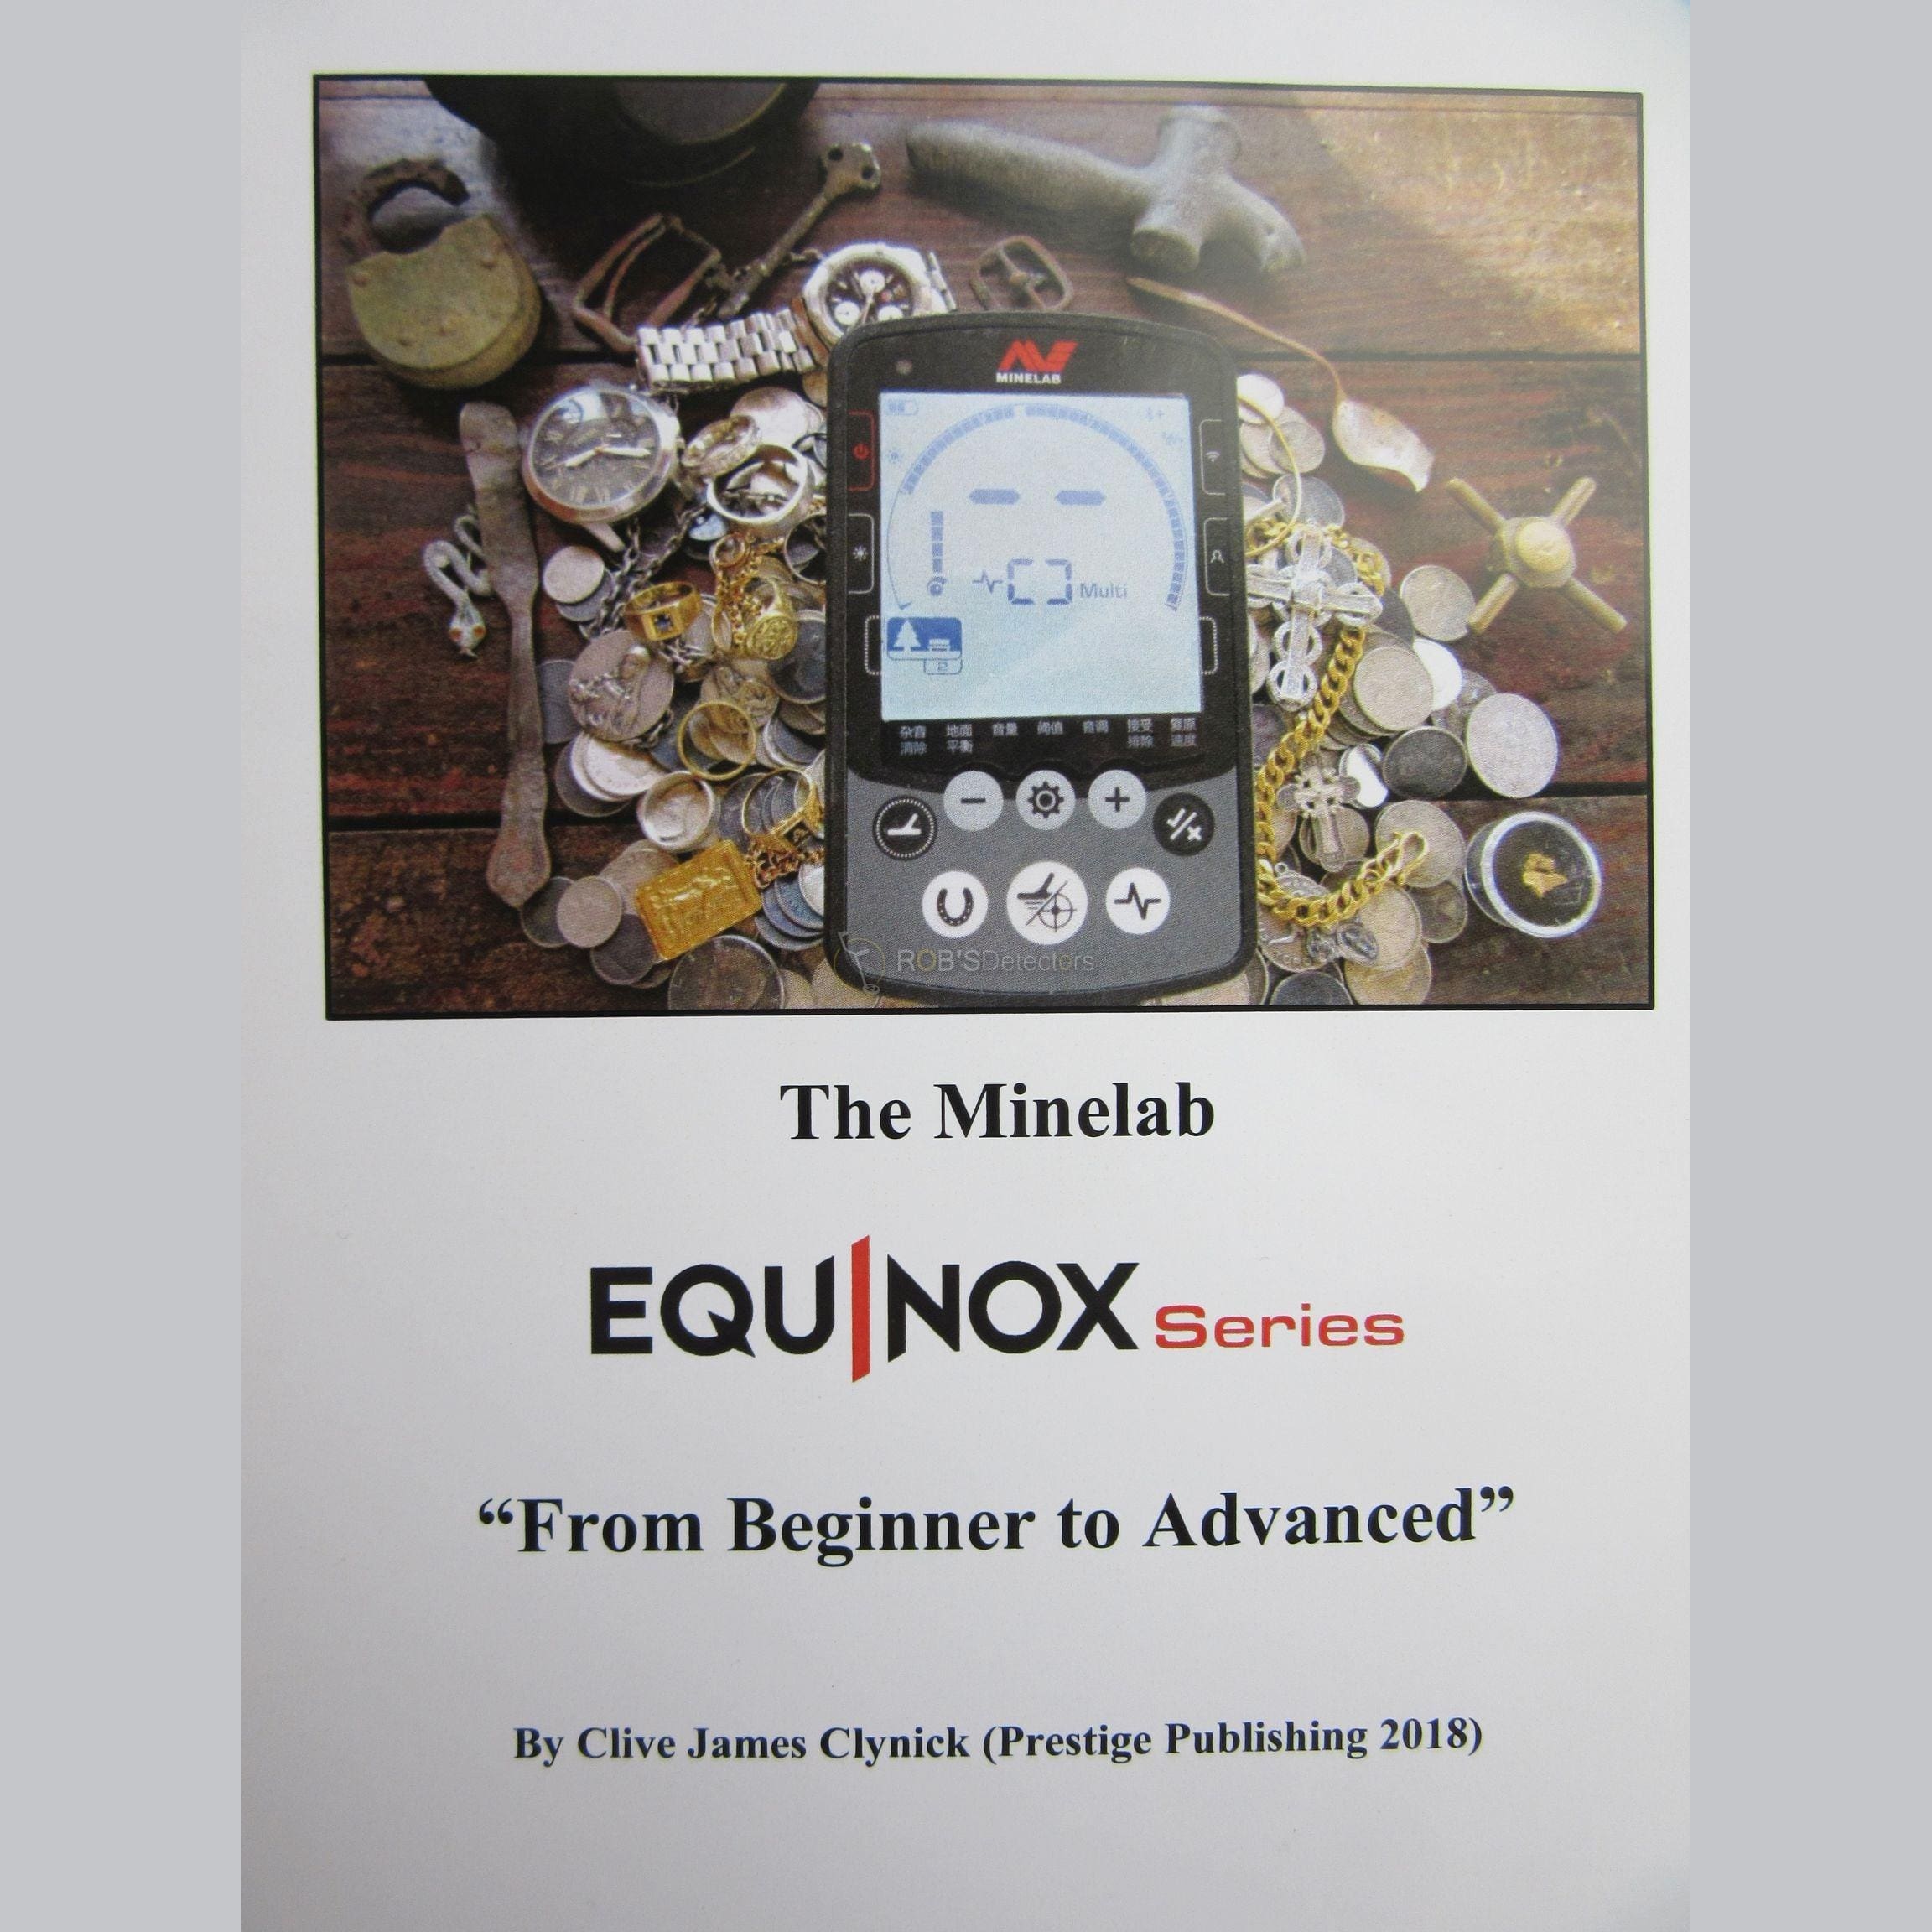 The Minelab Equinox: “From Beginner to Advanced” Book